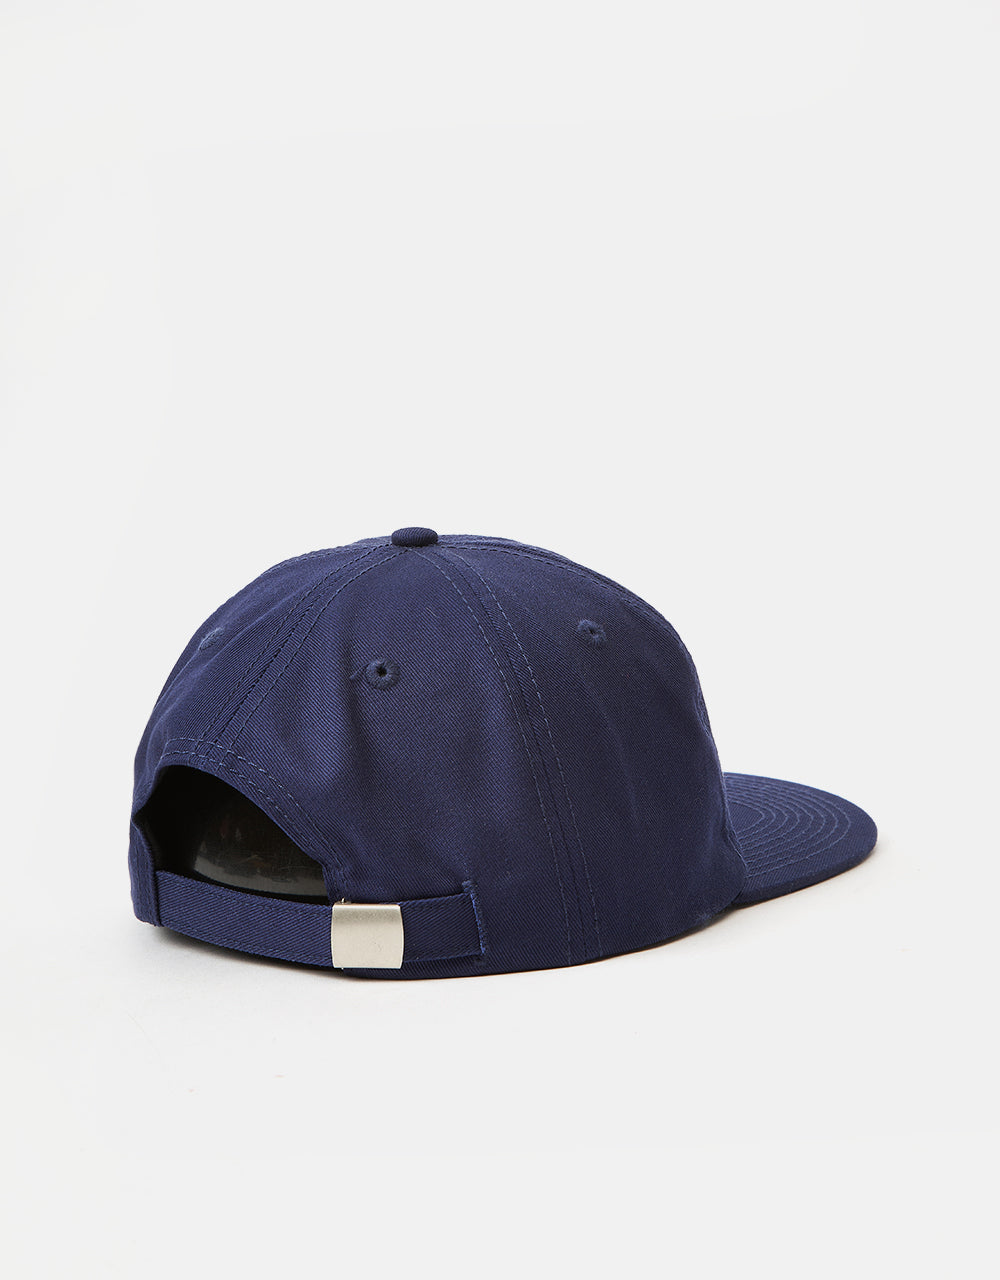 Route One Fruit One Unstructured 6 Panel Cap - Washed Navy